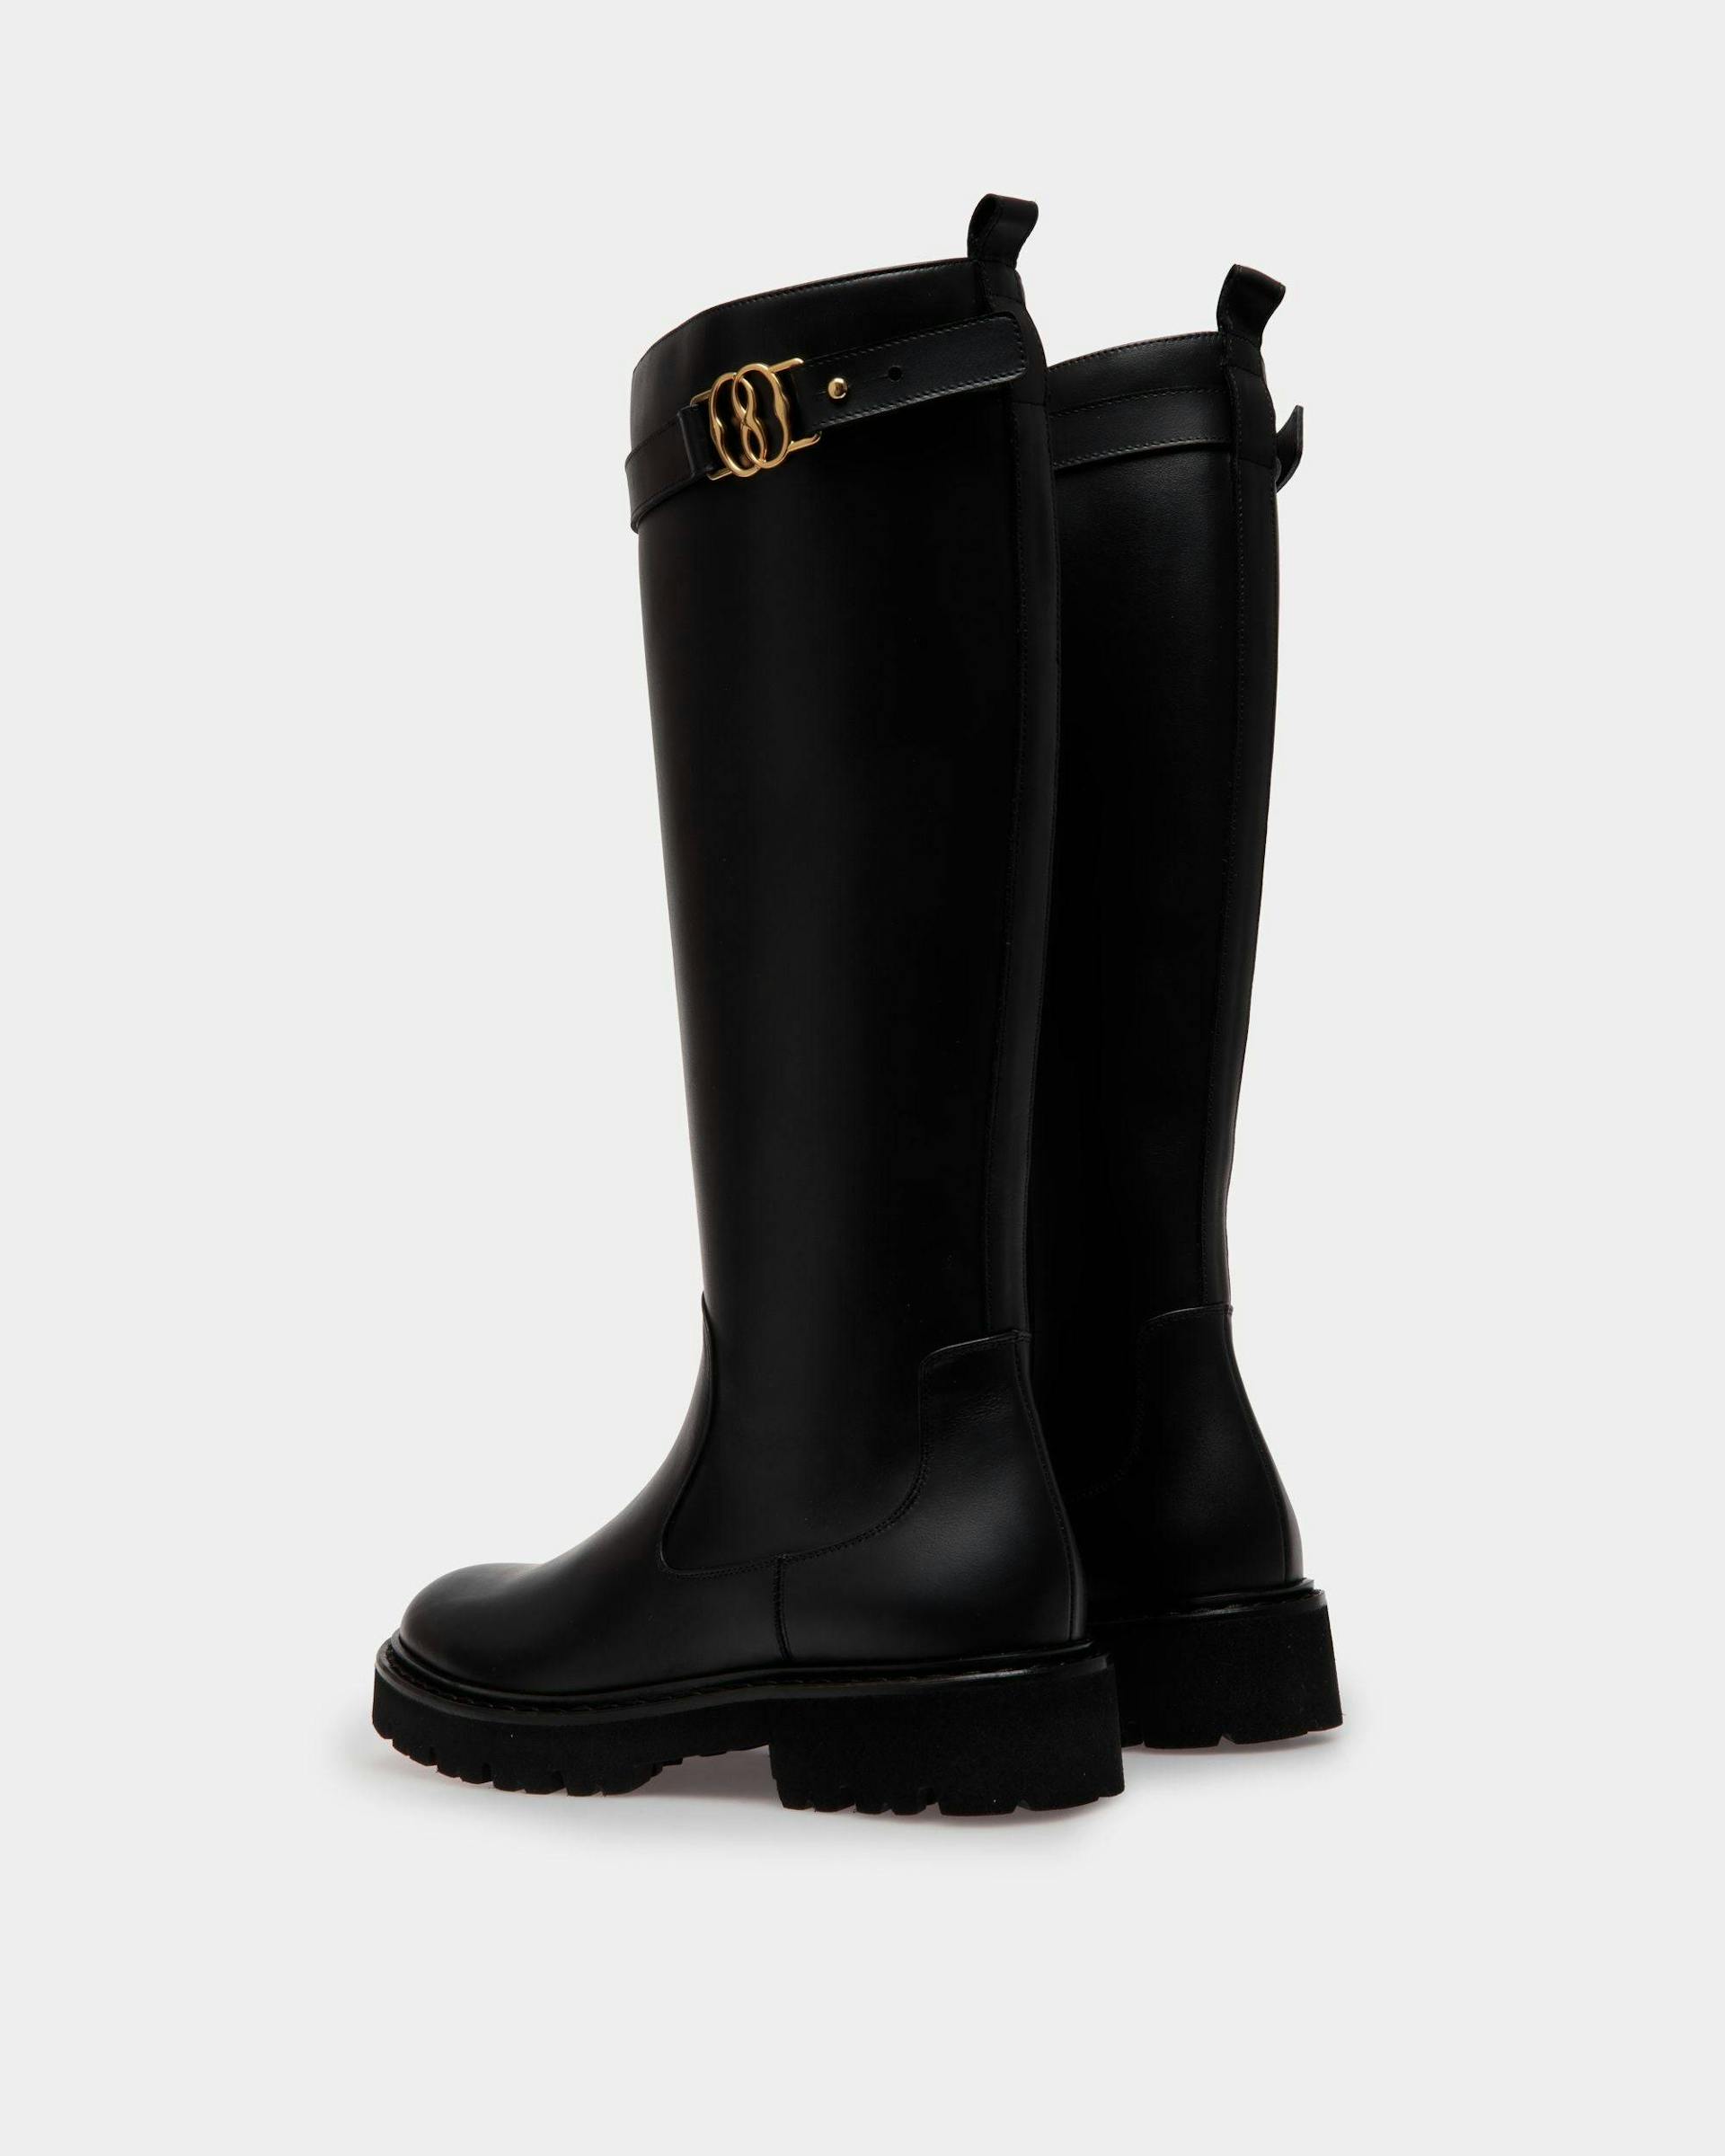 Women's Enga Long Boots In Black Leather | Bally | Still Life 3/4 Back